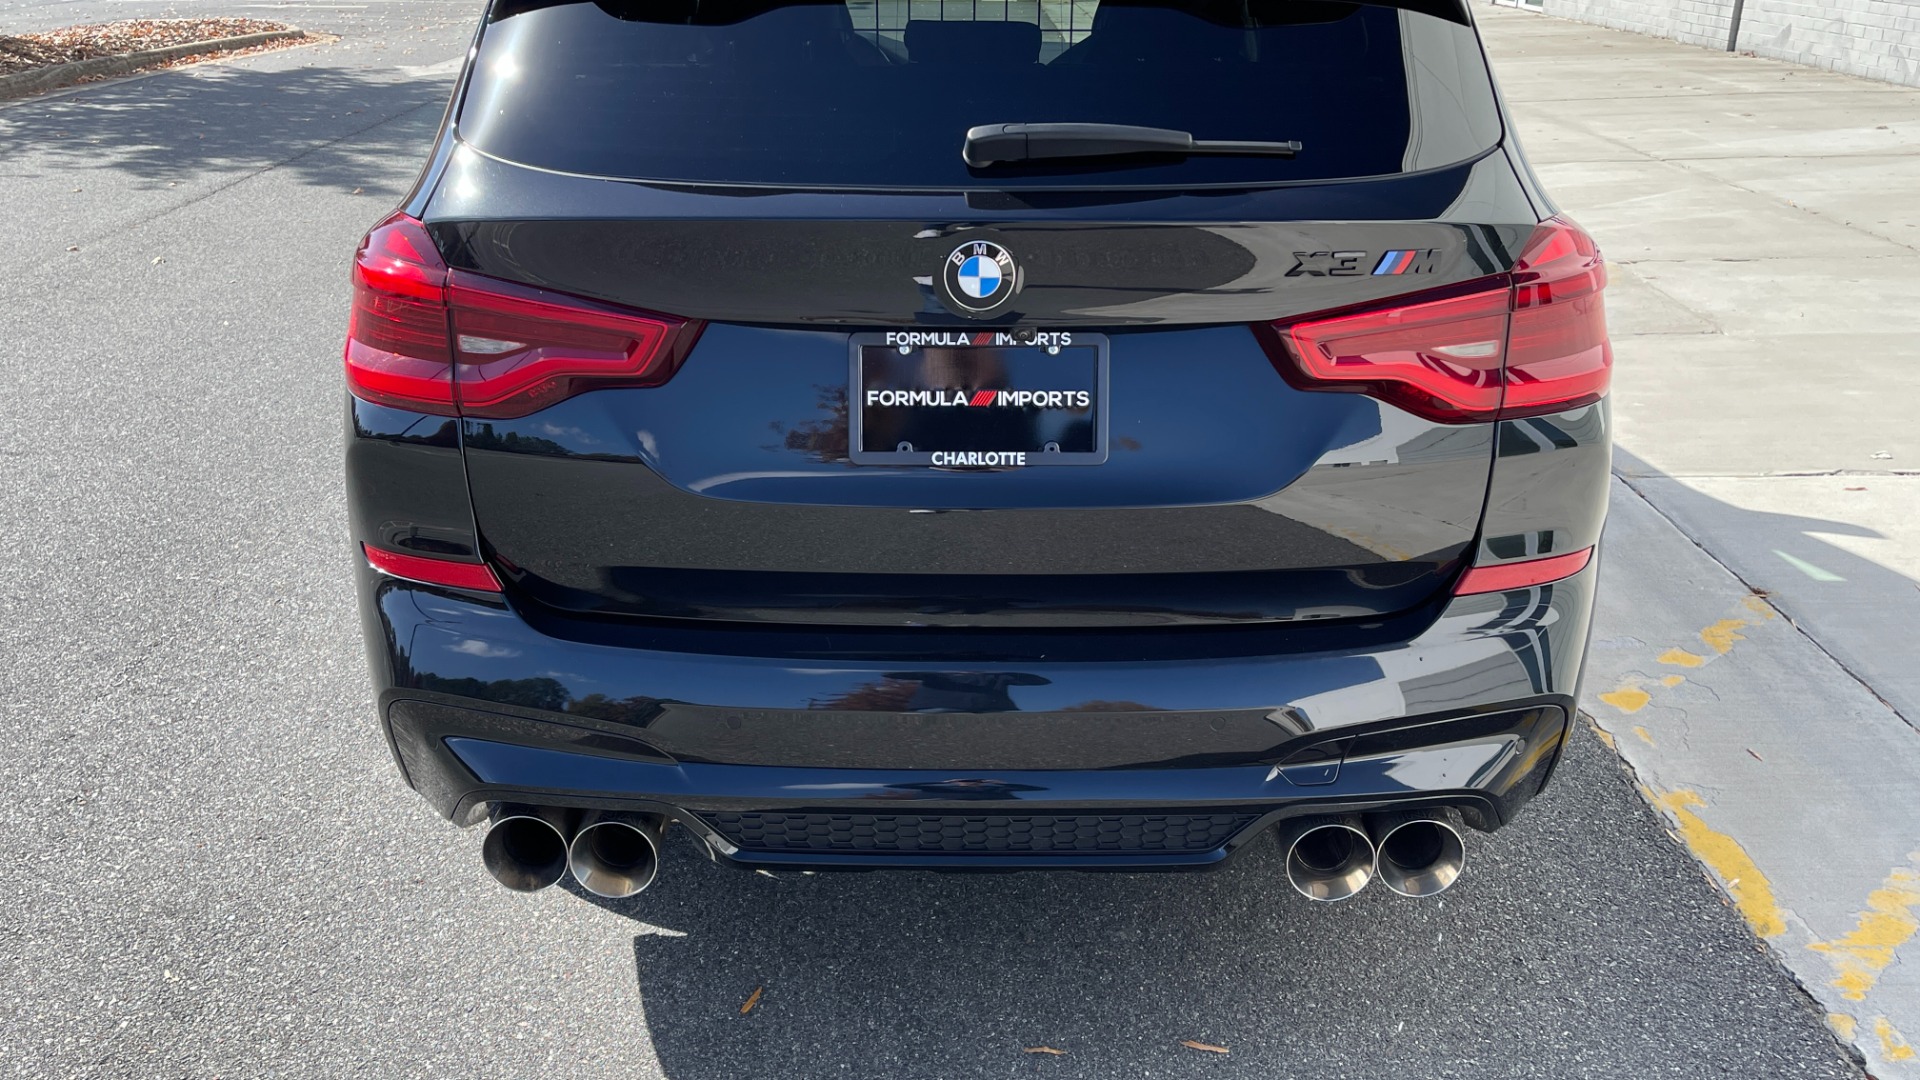 Used 2020 BMW X3 M MERINO LEATHER / EXECUTIVE PACKAGE / DINAN EXHAUST for sale $58,999 at Formula Imports in Charlotte NC 28227 8